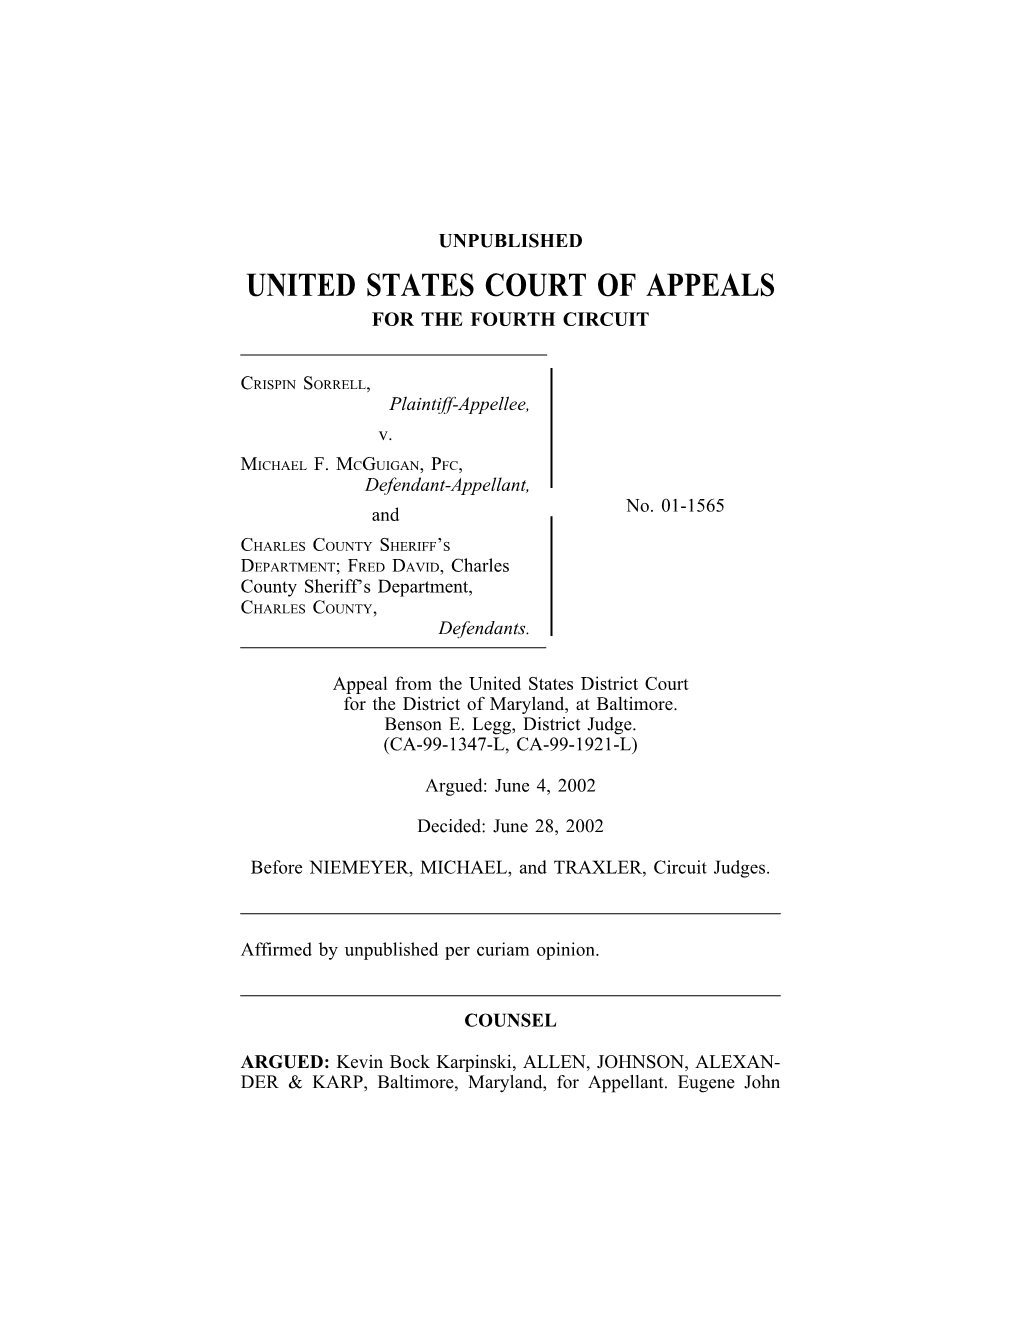 SORRELL V. MCGUIGAN Yannon, Annapolis, Maryland, for Appellee